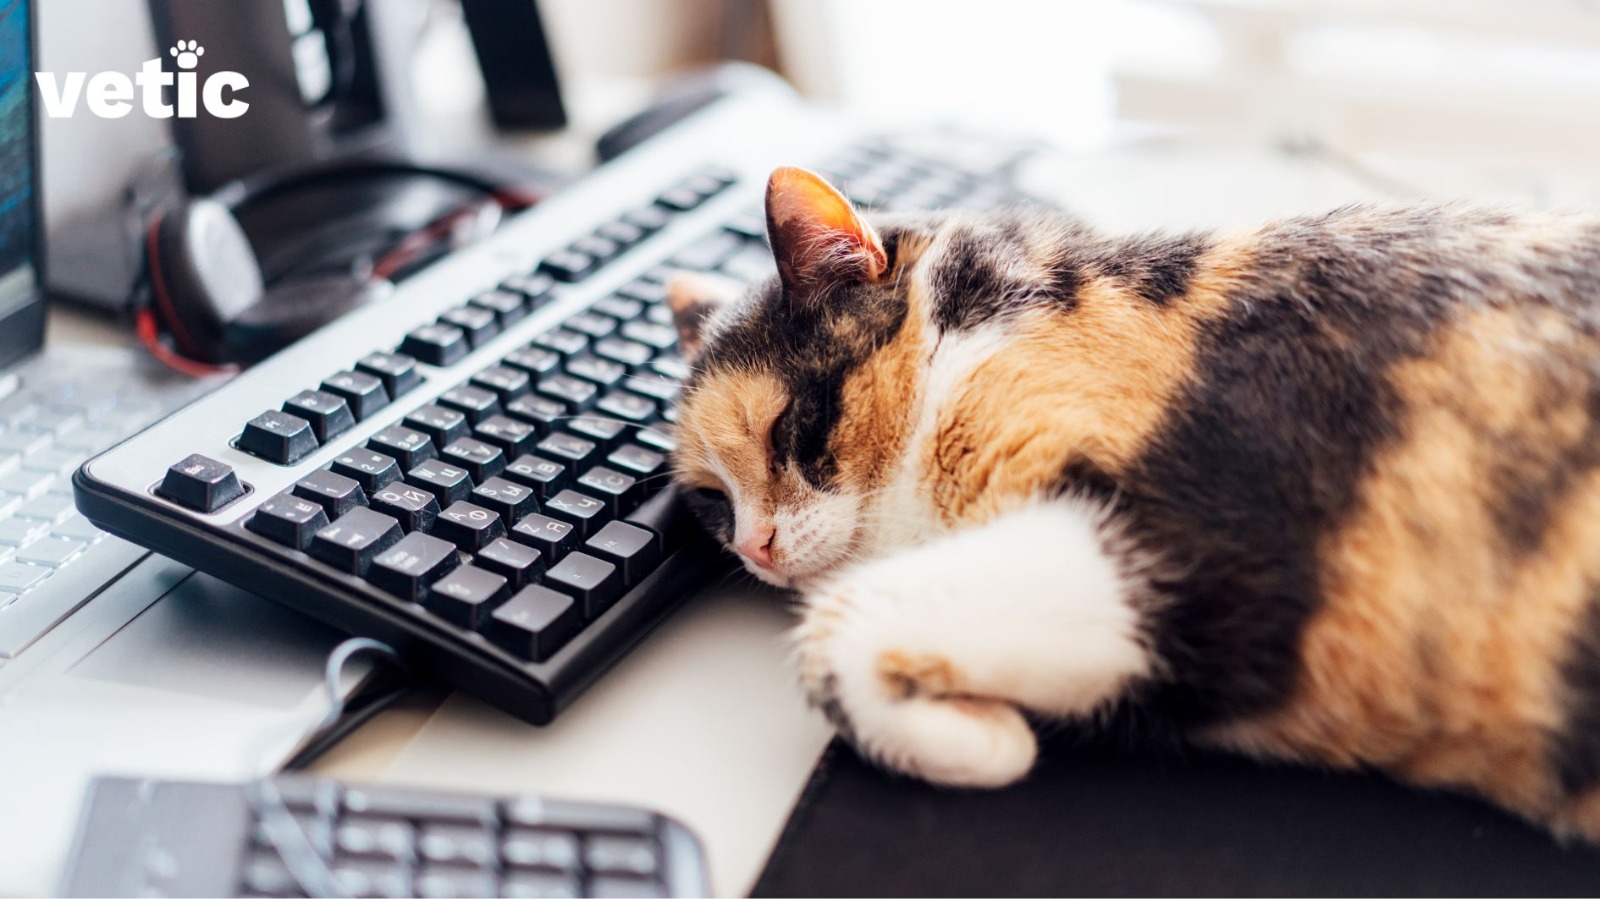 Calico cat sleeping with her head on the keyboard. Take your pet to work if they are calm and not aggressive towards other pets and people.